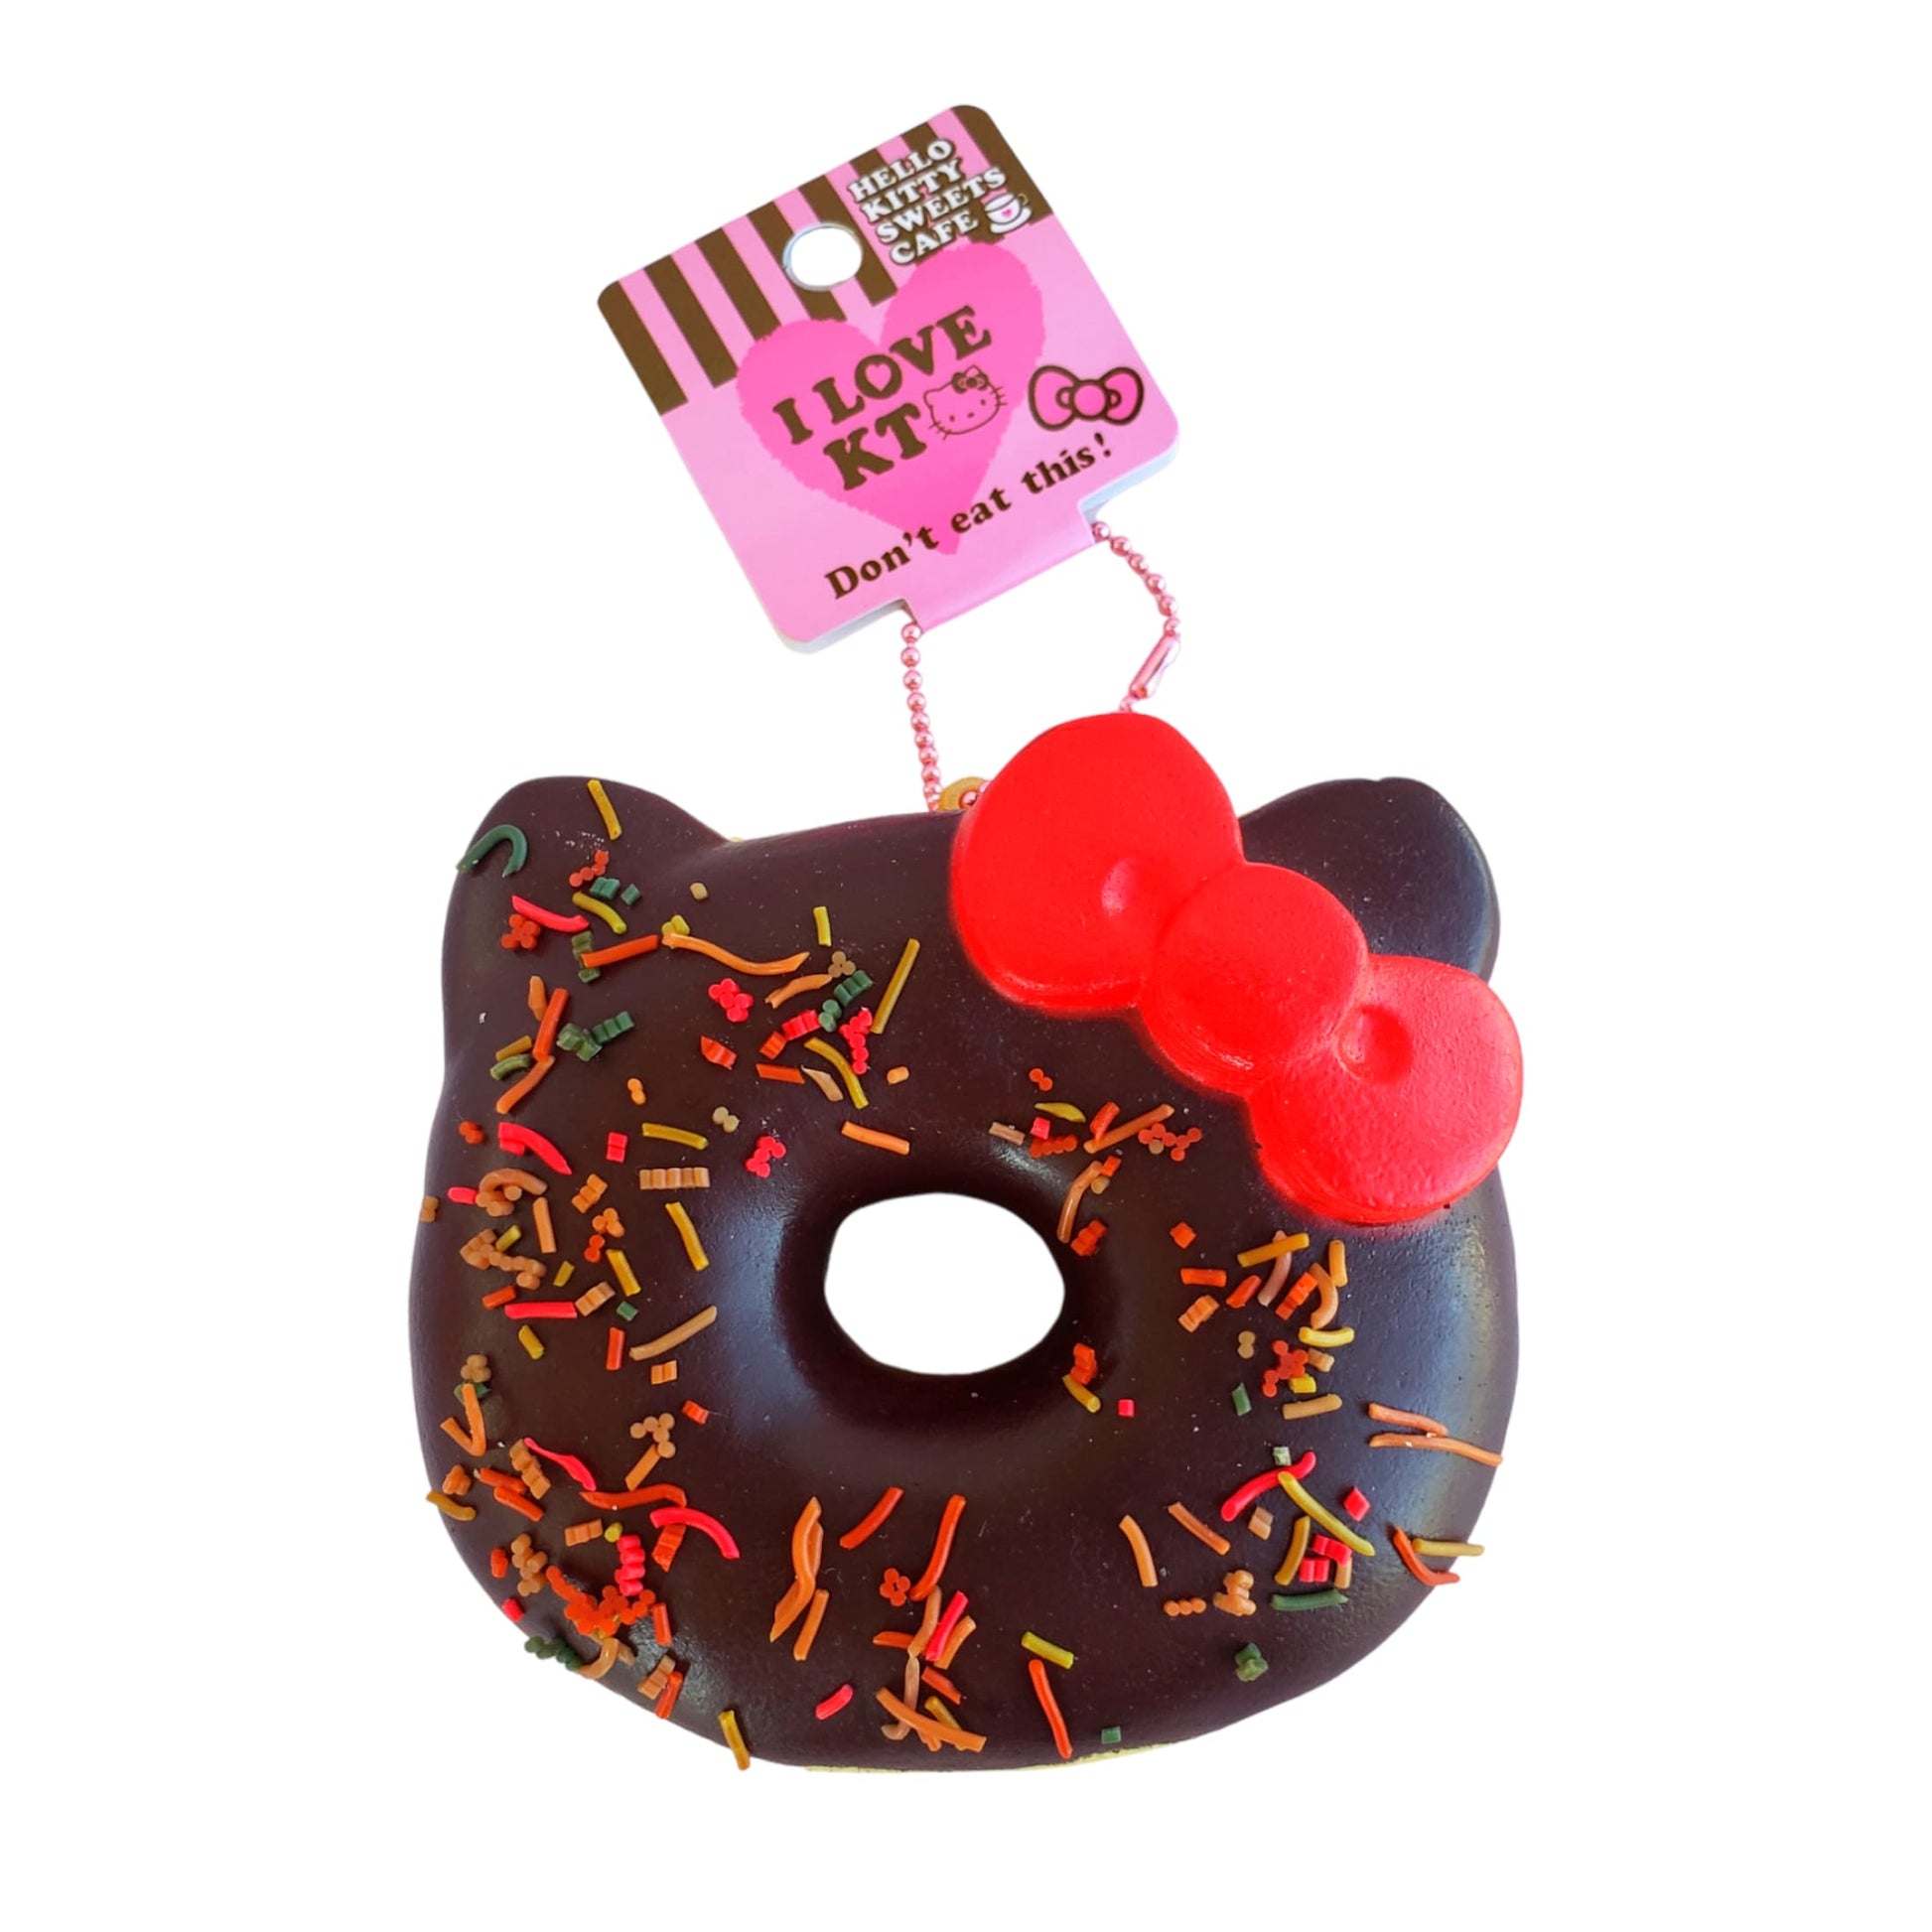 Sanrio Hello Kitty Sweets Cafe Chocolate Glazed Sprinkle Doughnut Squishy Bag Charm from Confetti Kitty, Only 9.99